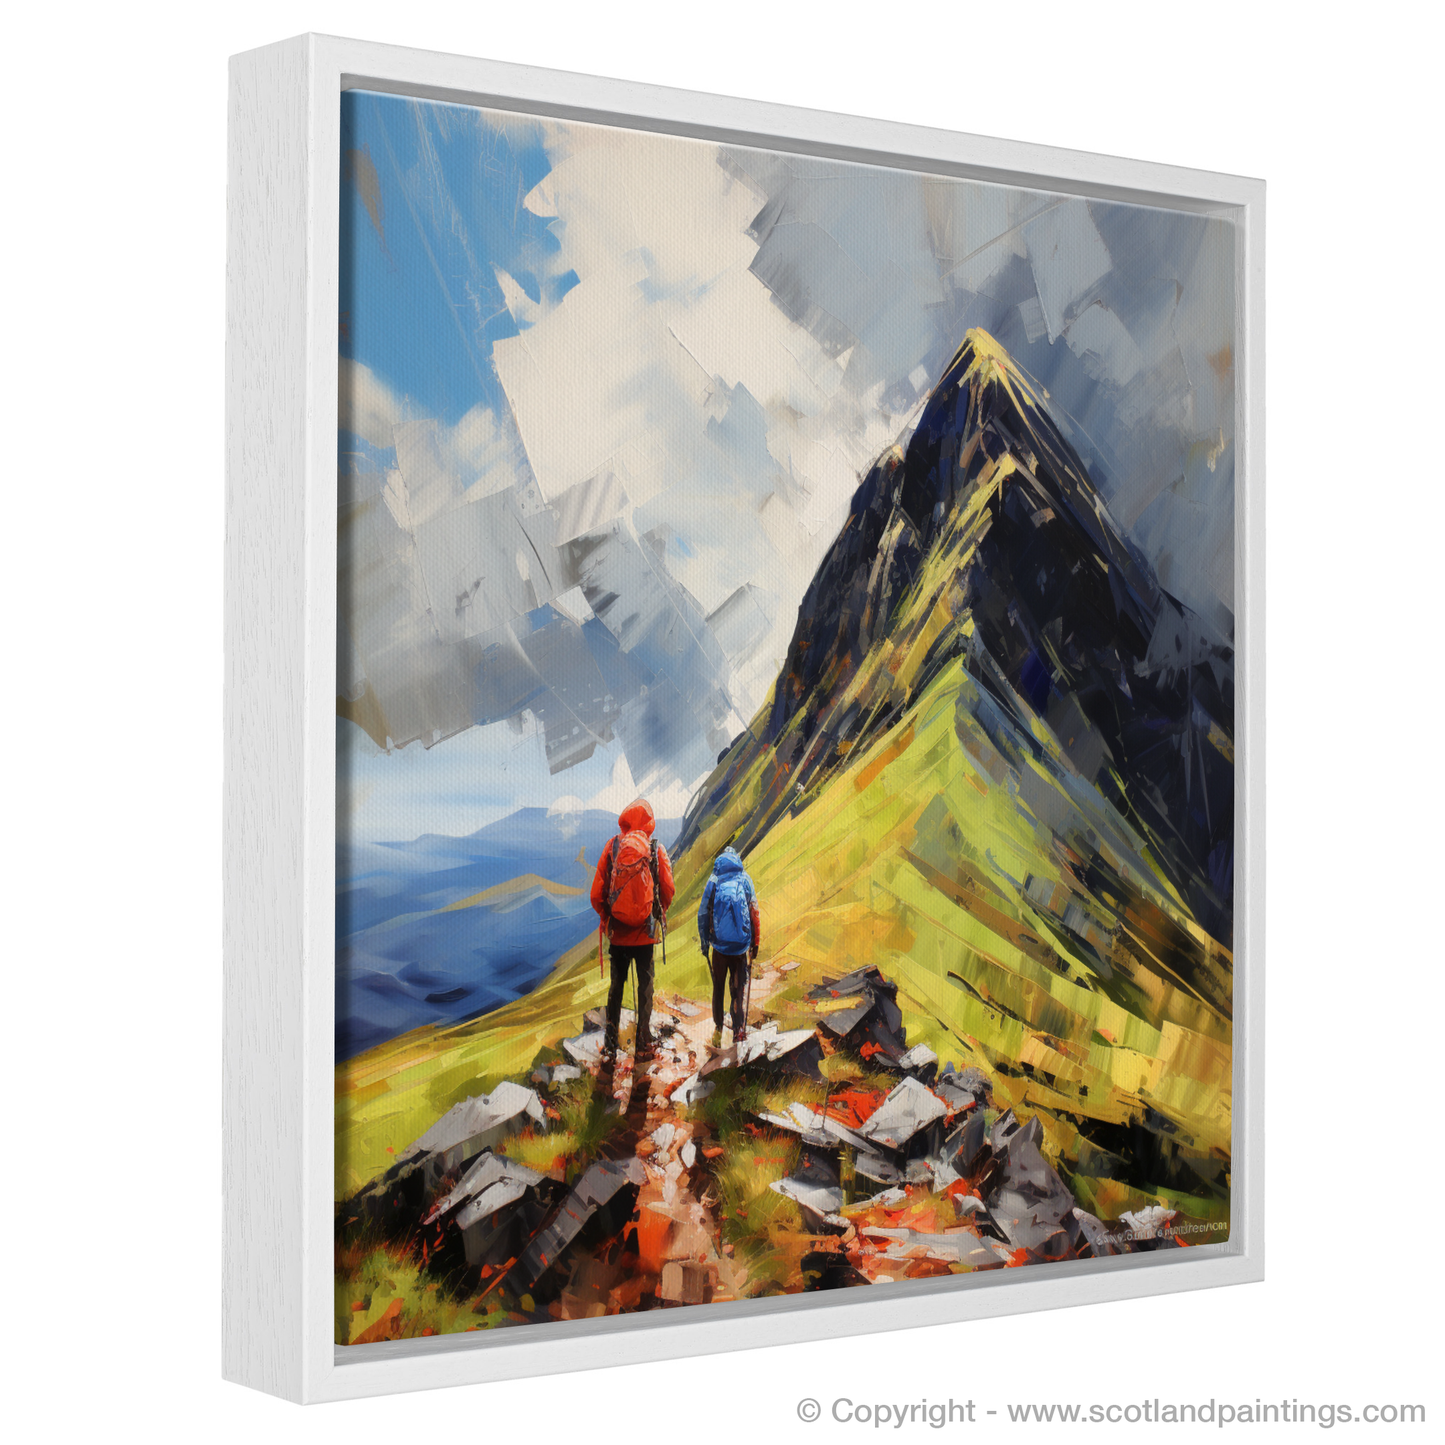 Painting and Art Print of Hikers at Buachaille summit in Glencoe entitled "Hikers Ascent to Buachaille Summit: An Expressionist Ode to Glencoe".